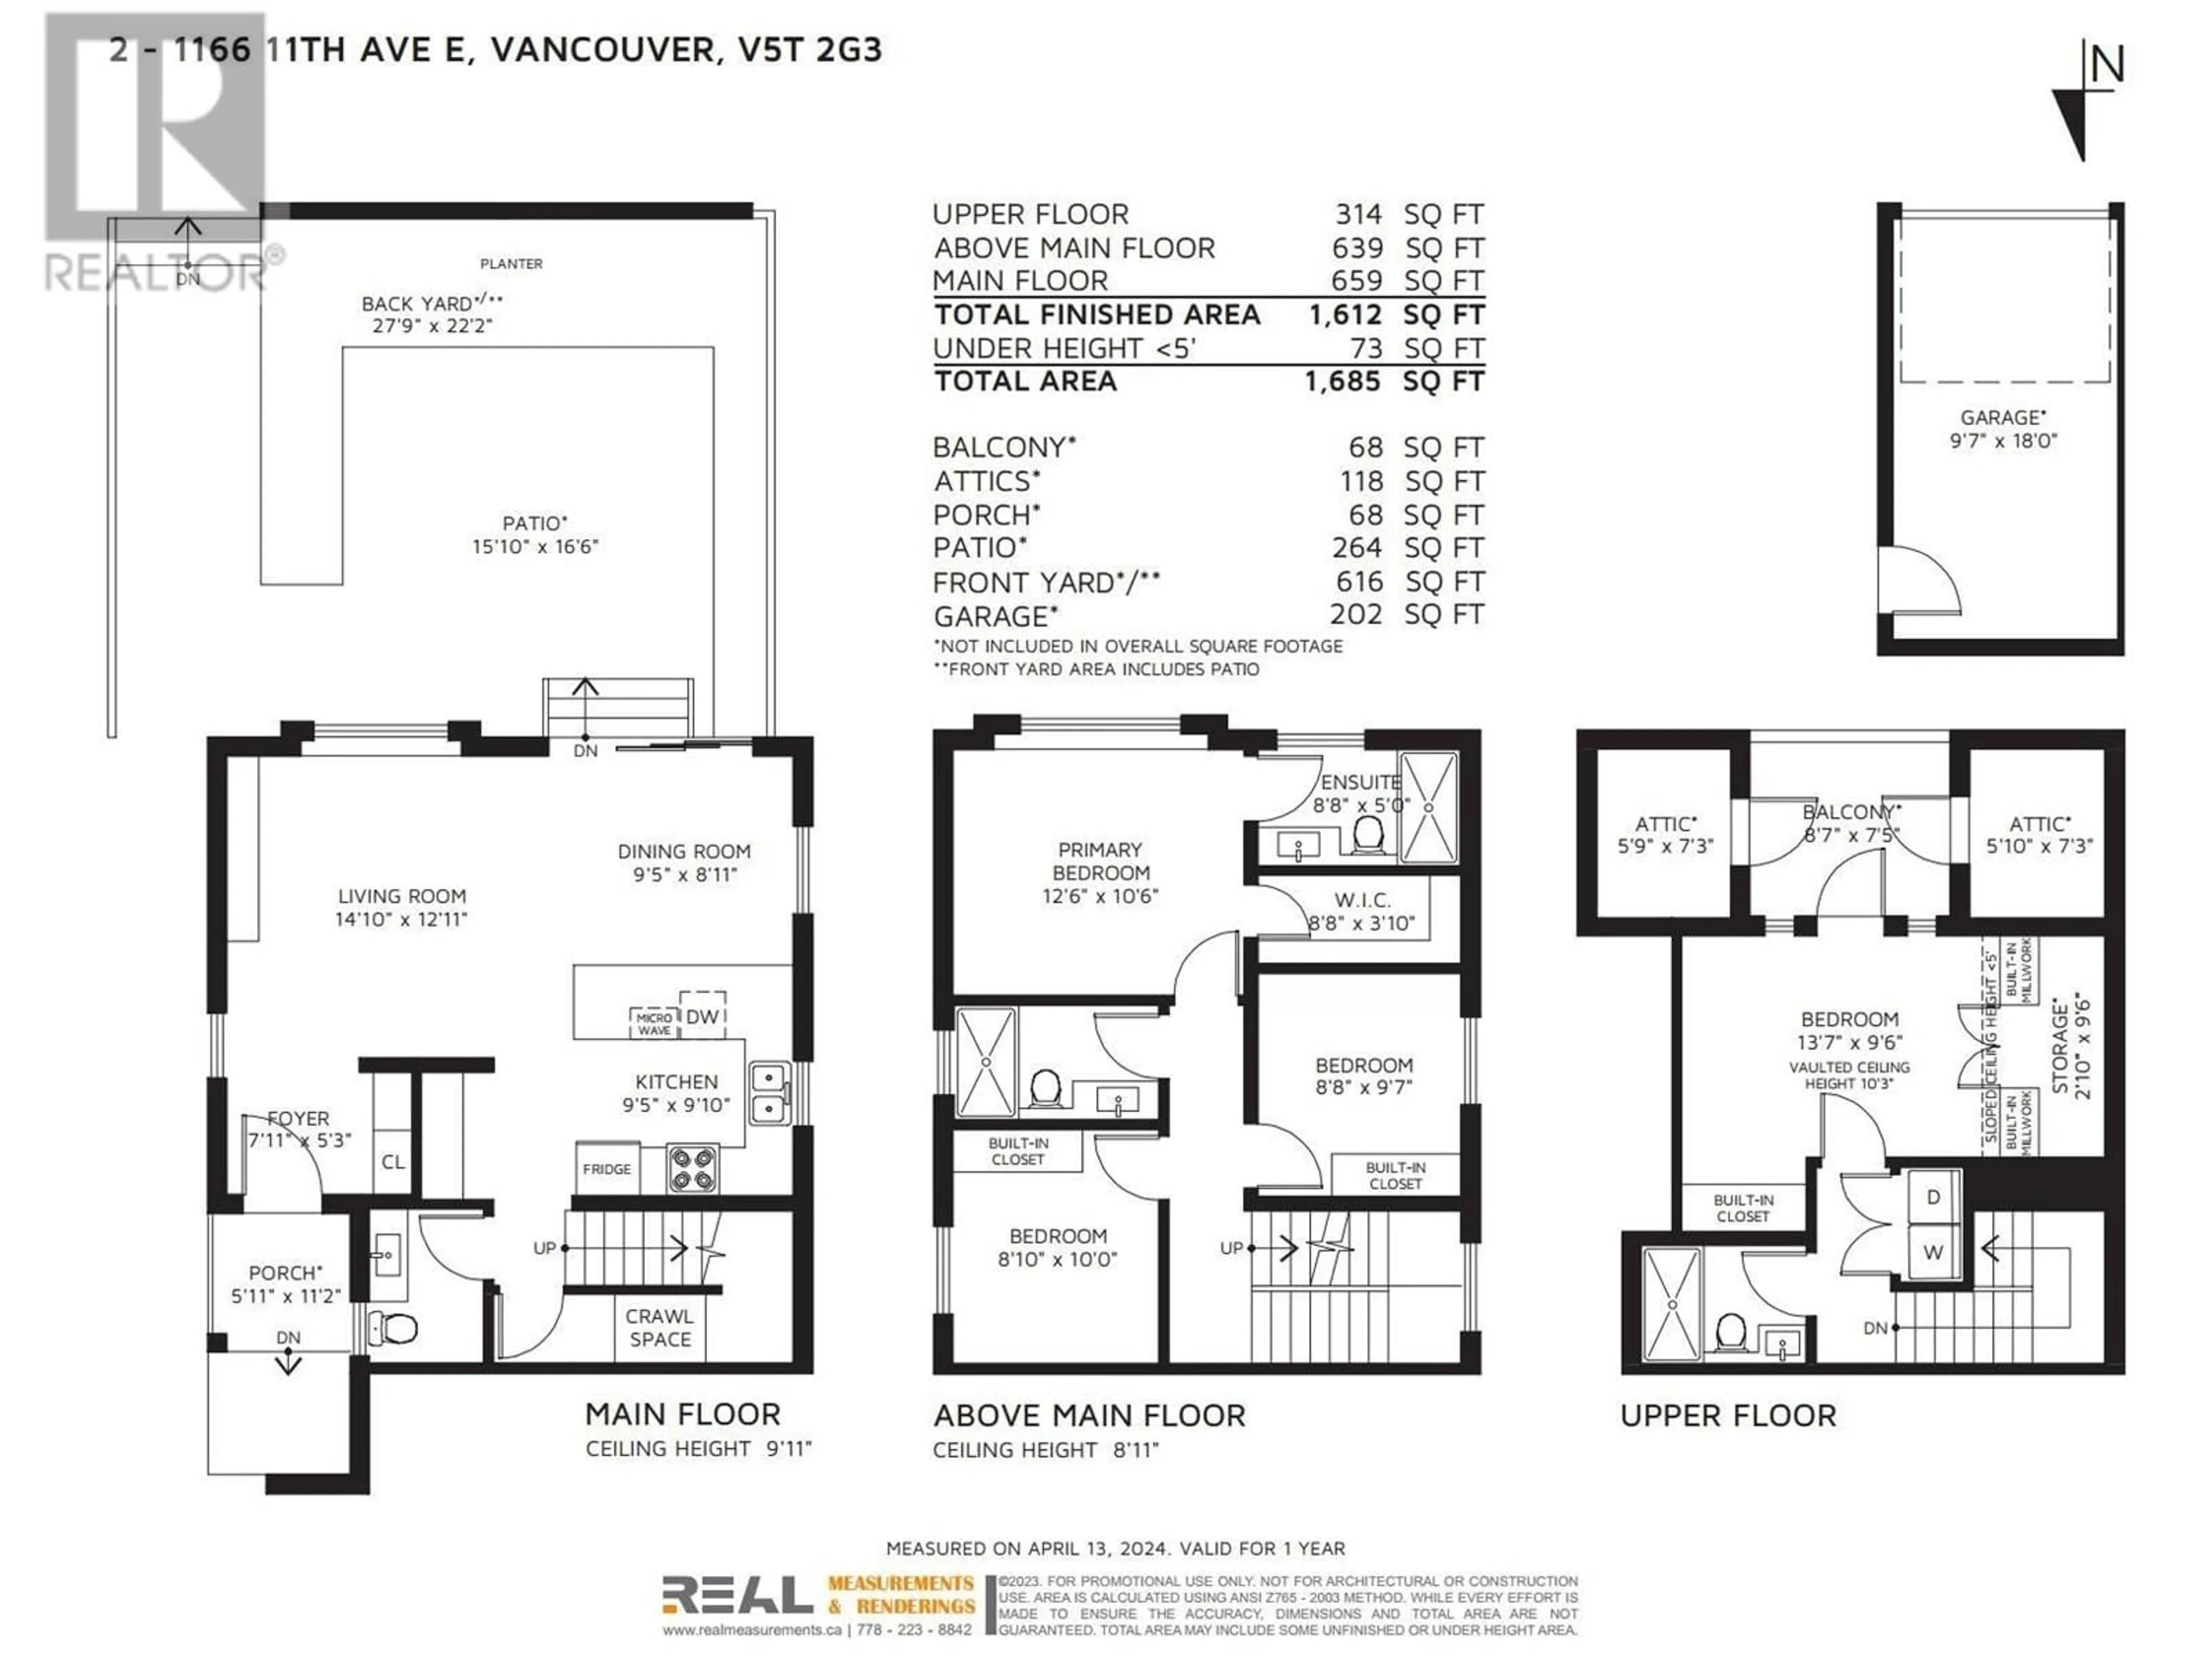 Floor plan for 2 1166 E 11TH AVENUE, Vancouver British Columbia V5T2G3